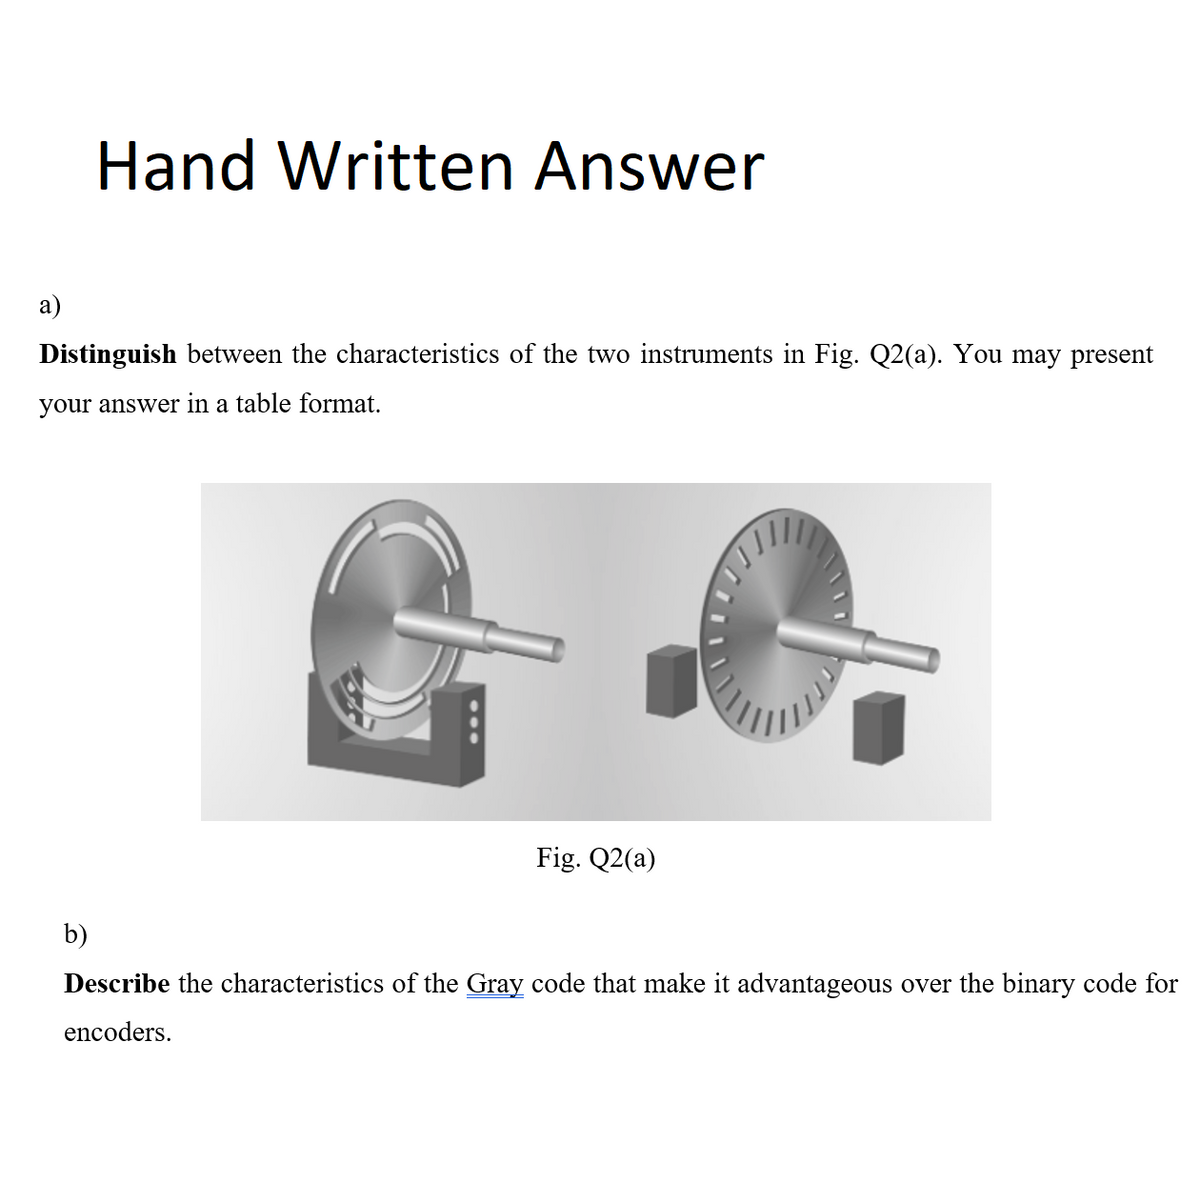 a)
Hand Written Answer
Distinguish between the characteristics of the two instruments in Fig. Q2(a). You may present
your answer in a table format.
Fig. Q2(a)
b)
Describe the characteristics of the Gray code that make it advantageous over the binary code for
encoders.